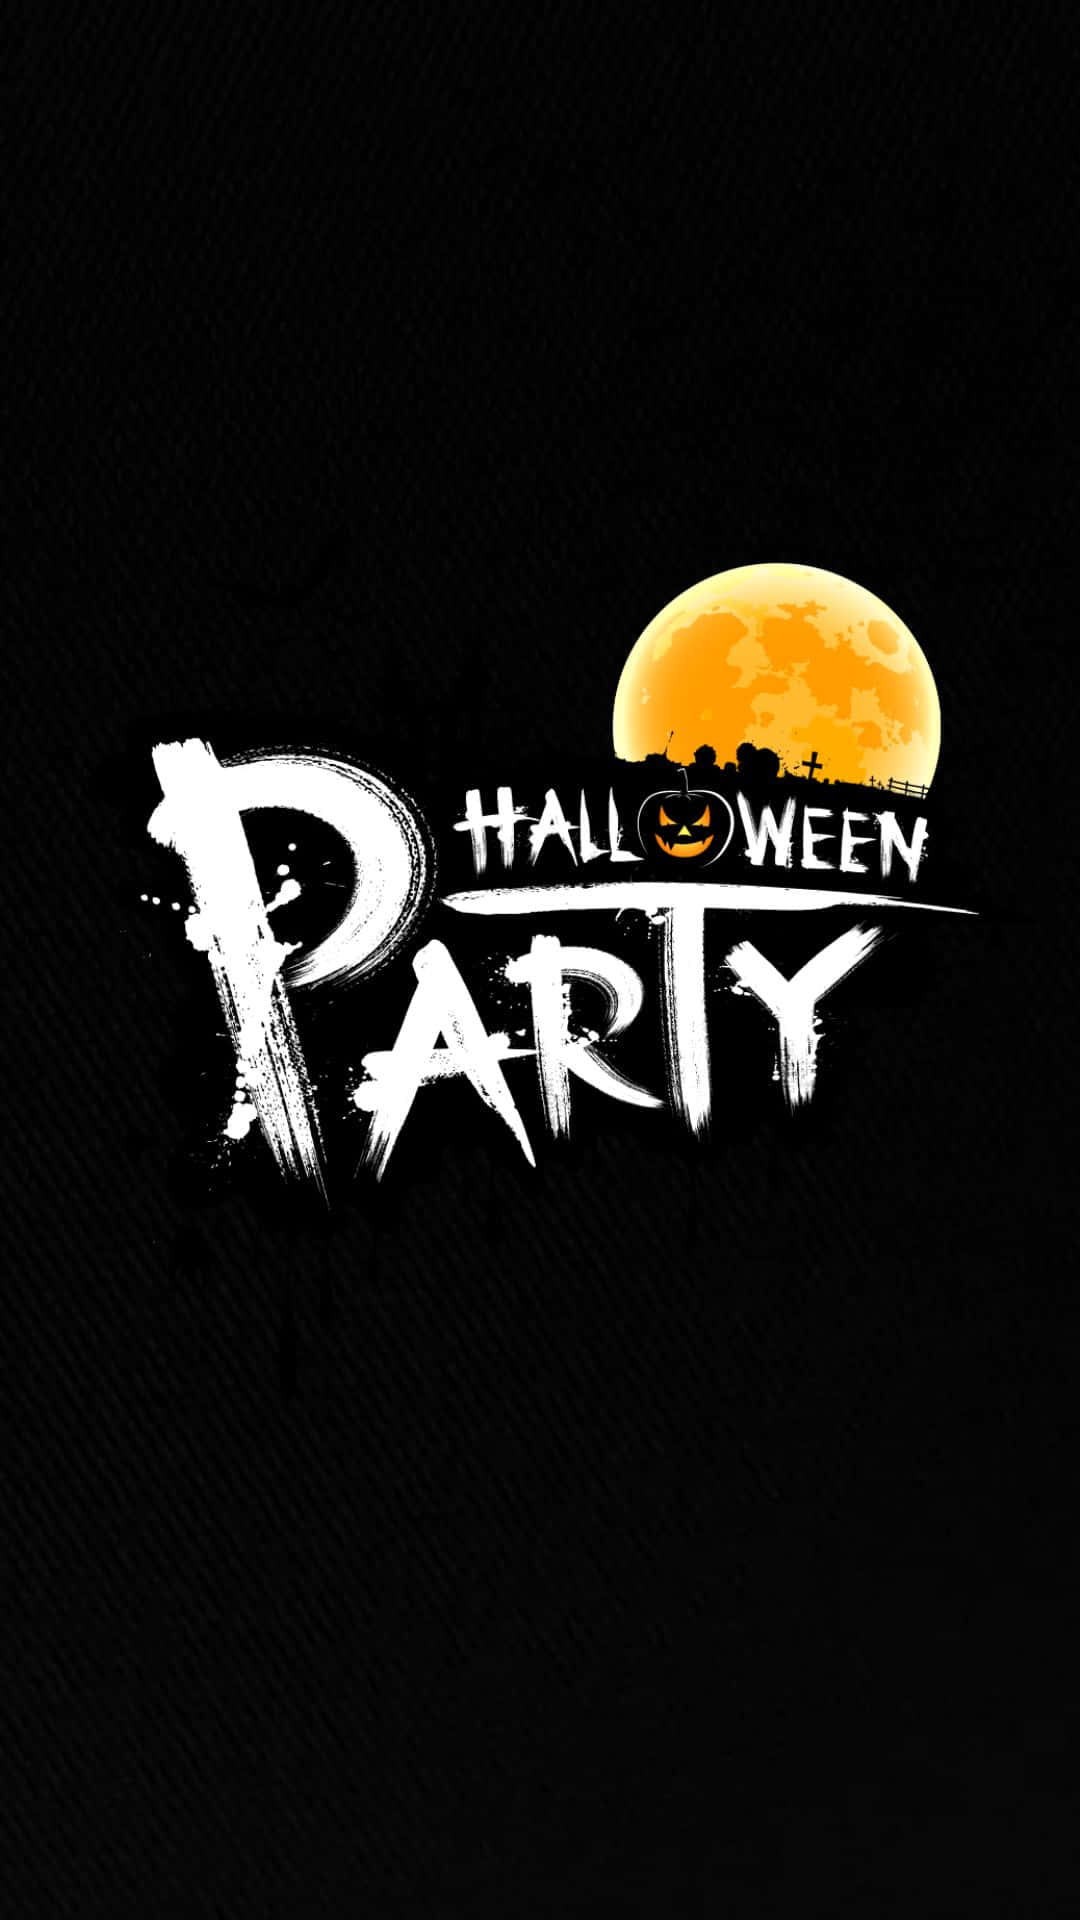 Let's get the spooky party started!